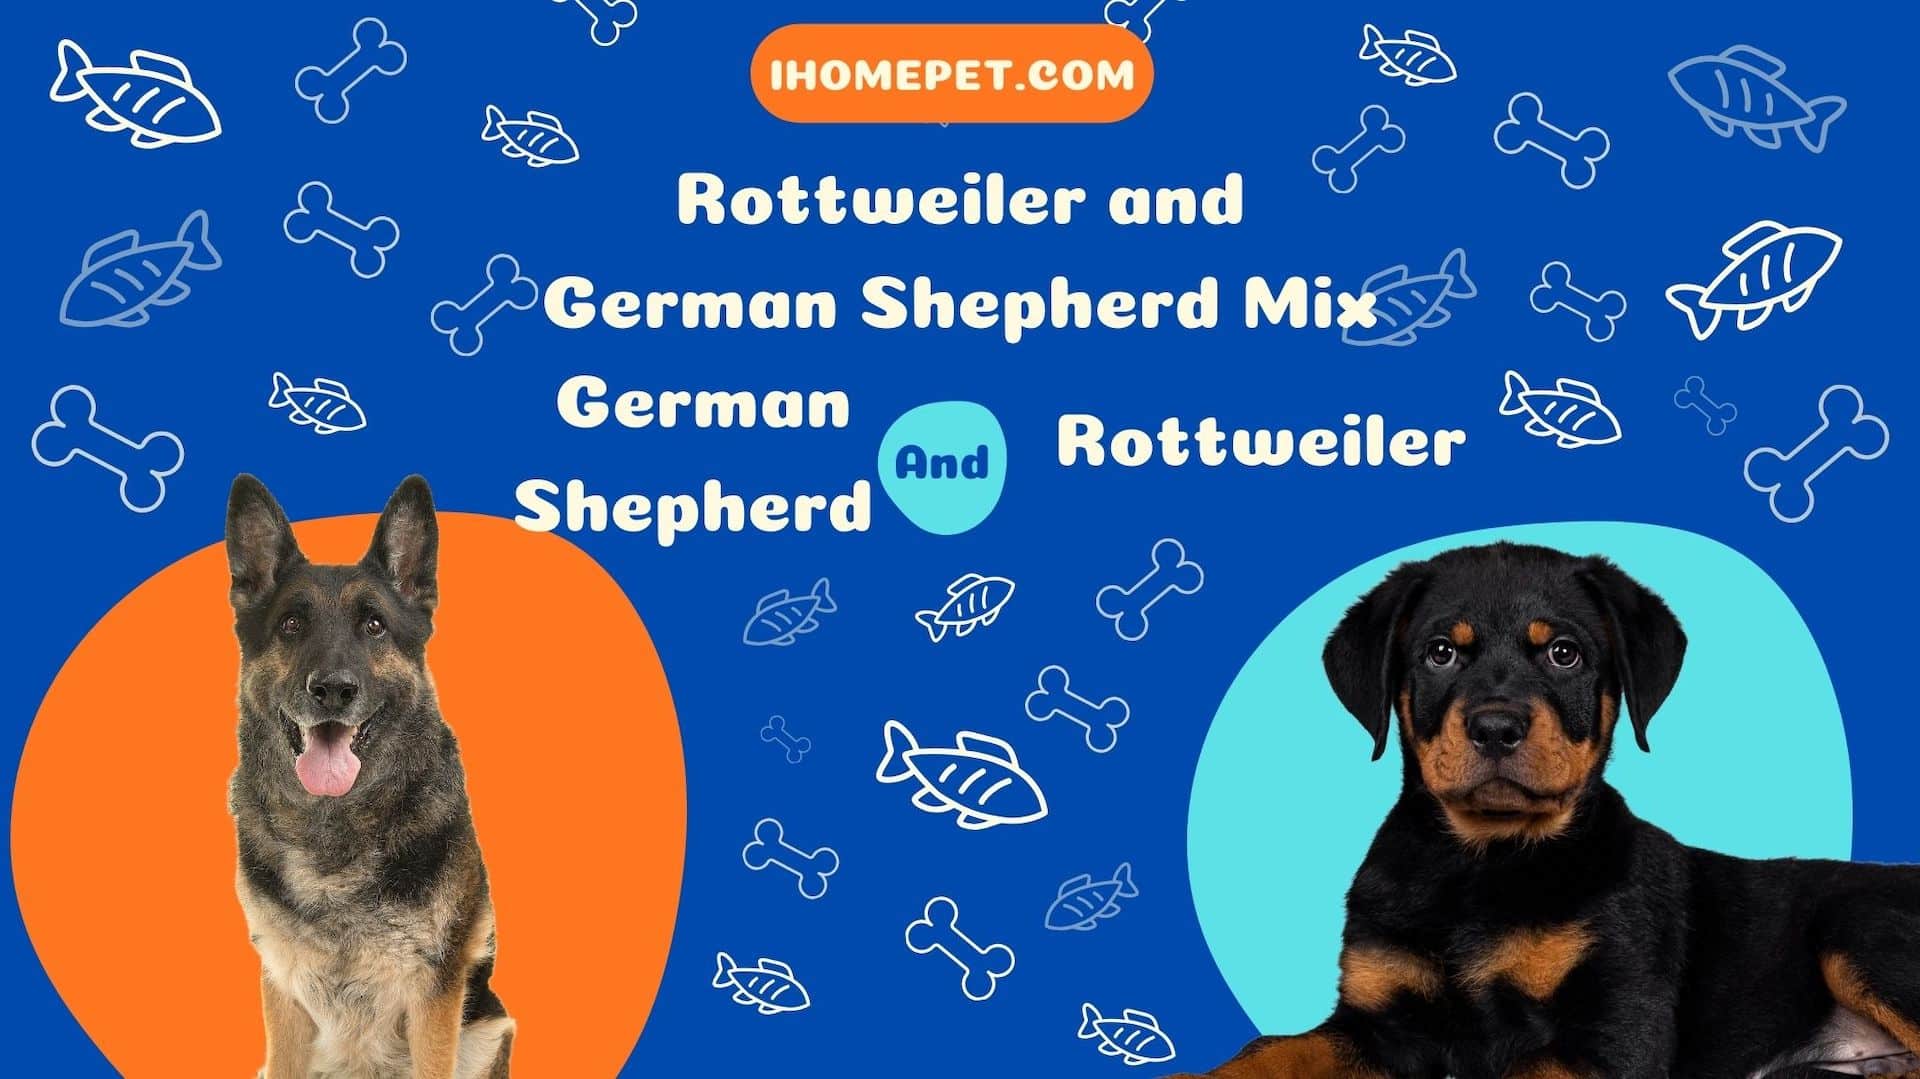 German shepherd rottweiler mix is the best dog for rescue missions